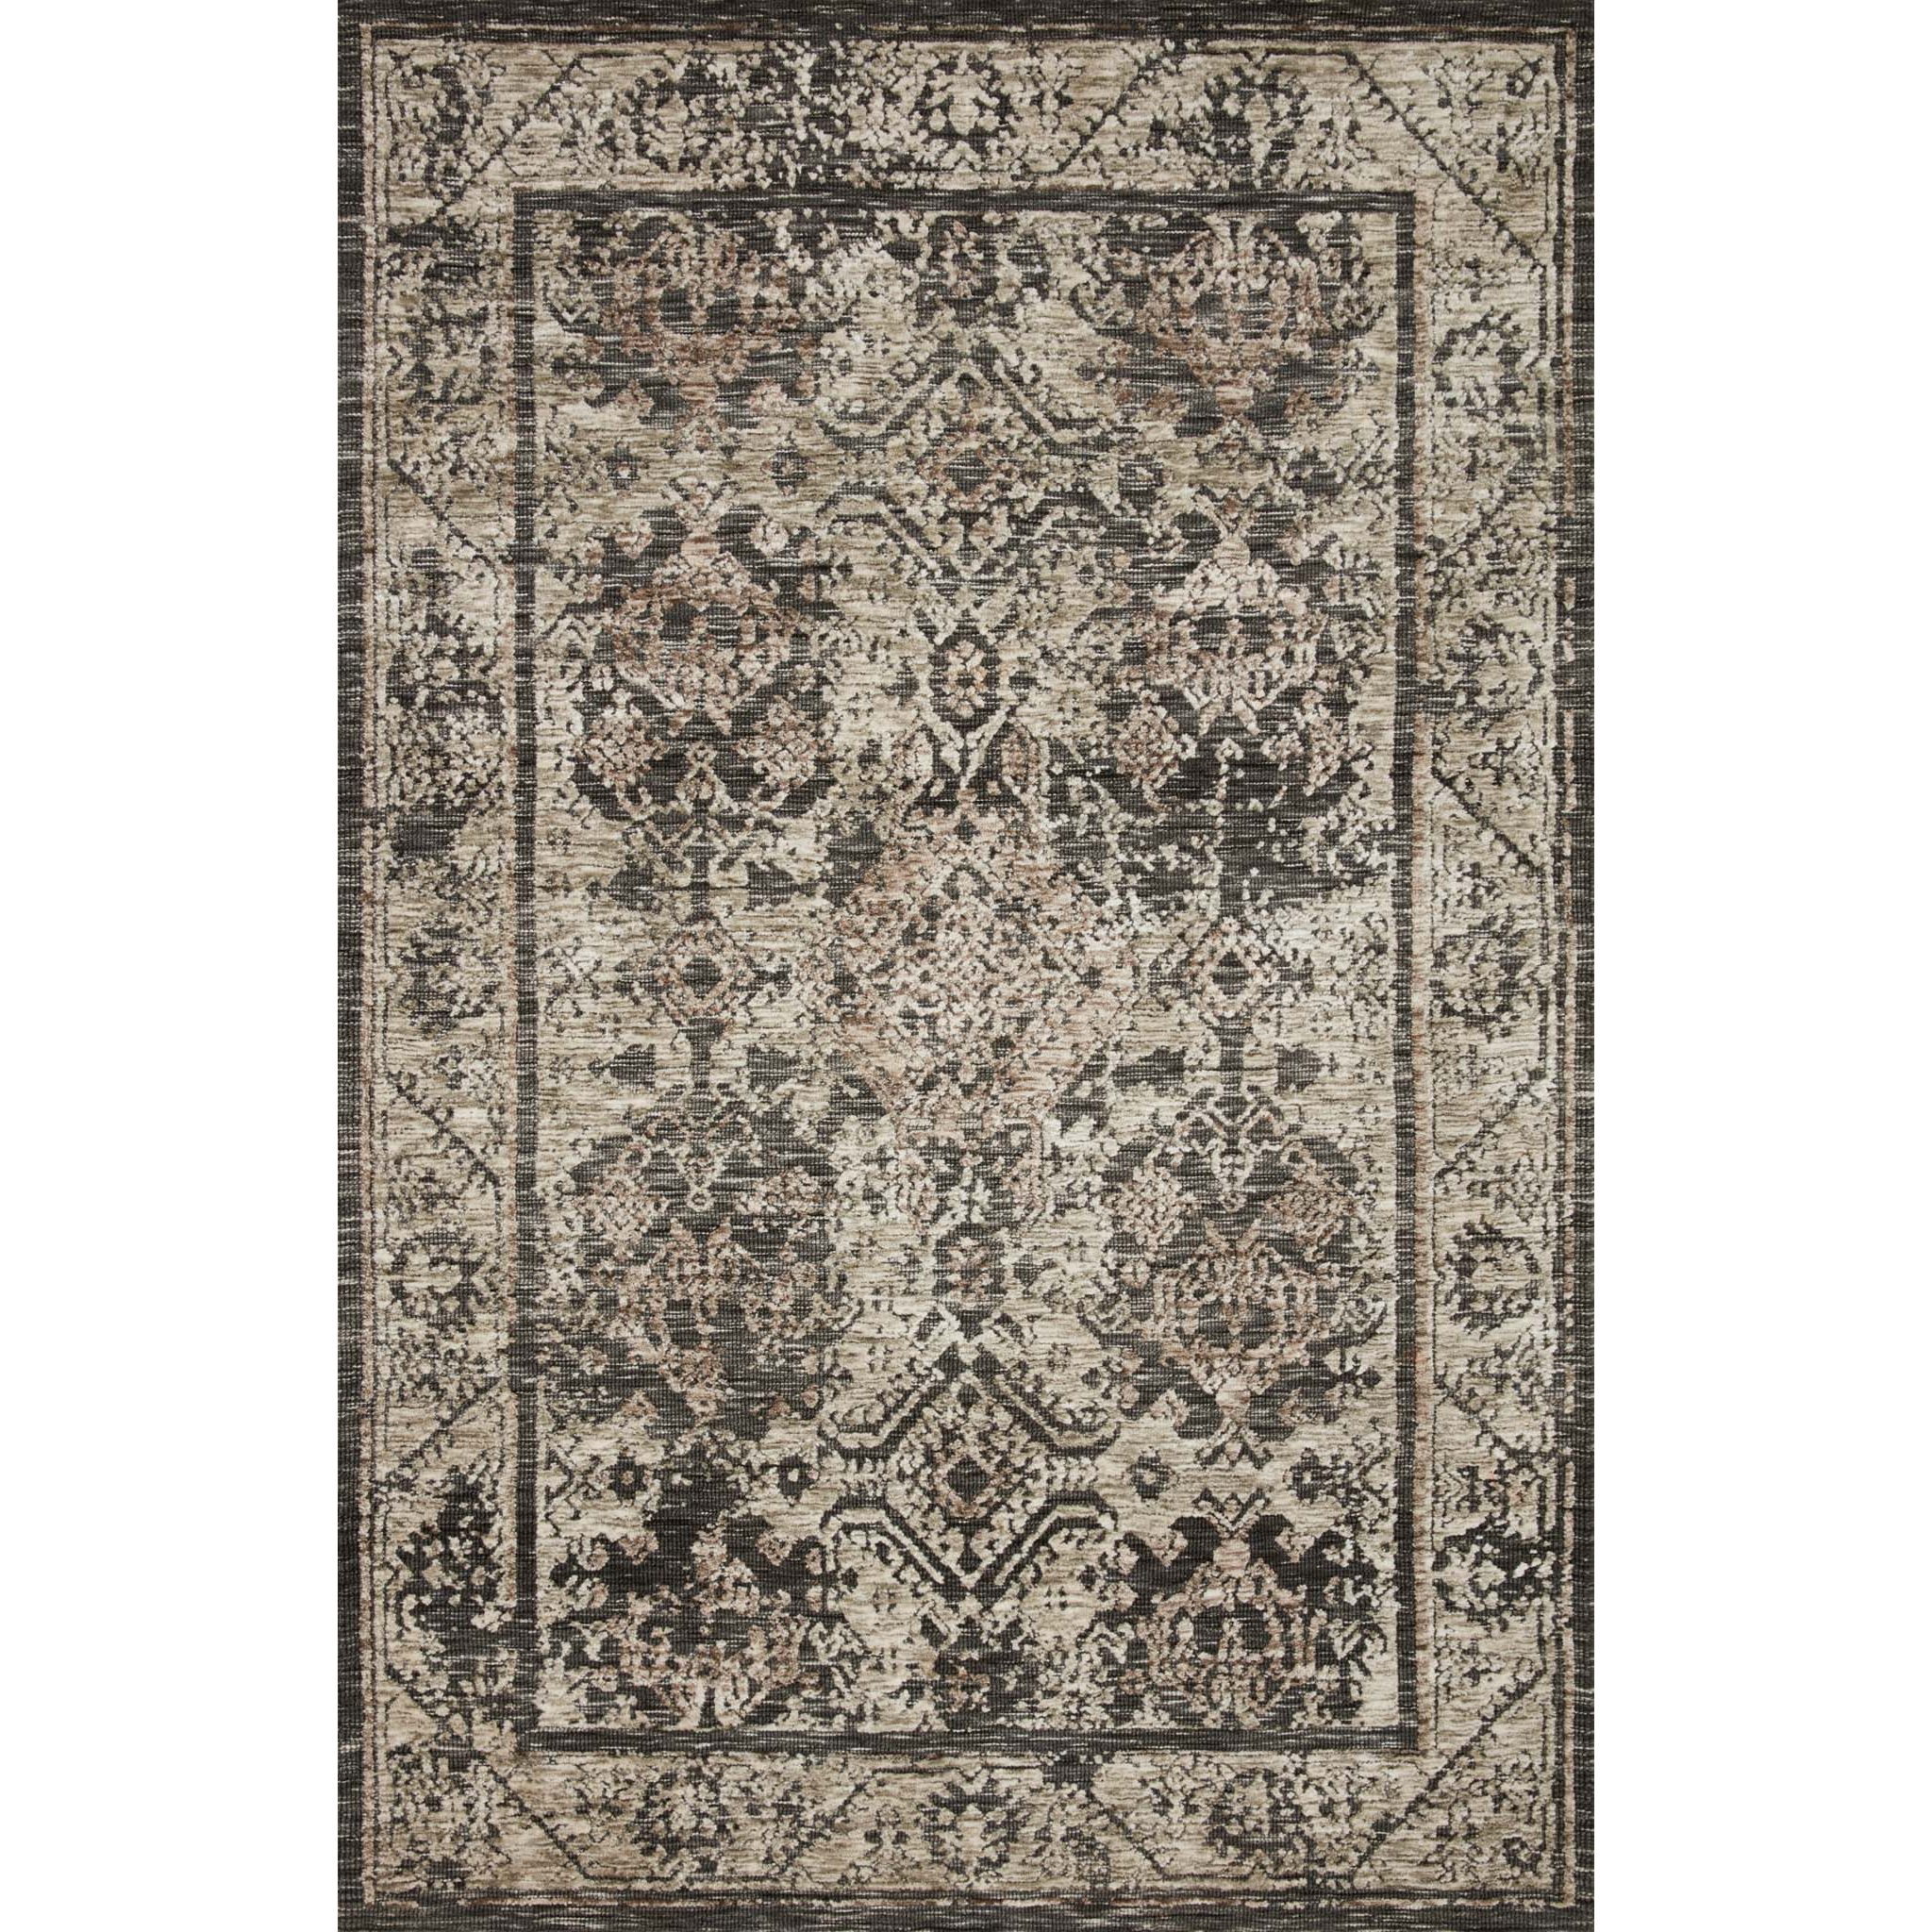 black and charcoal distressed rug with traditional detail Items range from $369.00 to $749.00